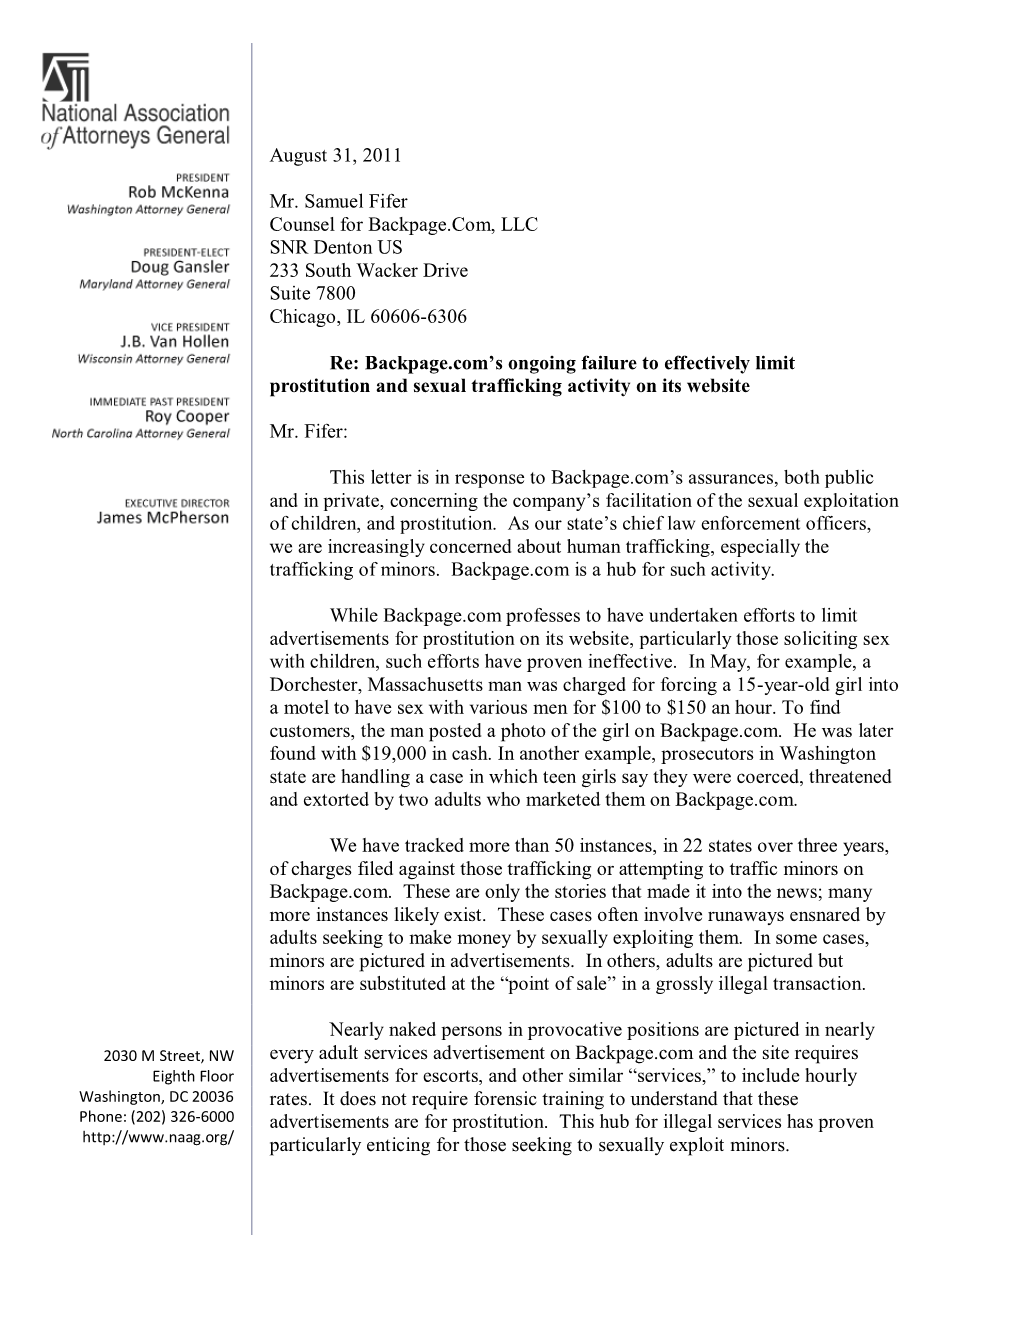 NAAG Letter to Backpage.Com Regarding Human Trafficking